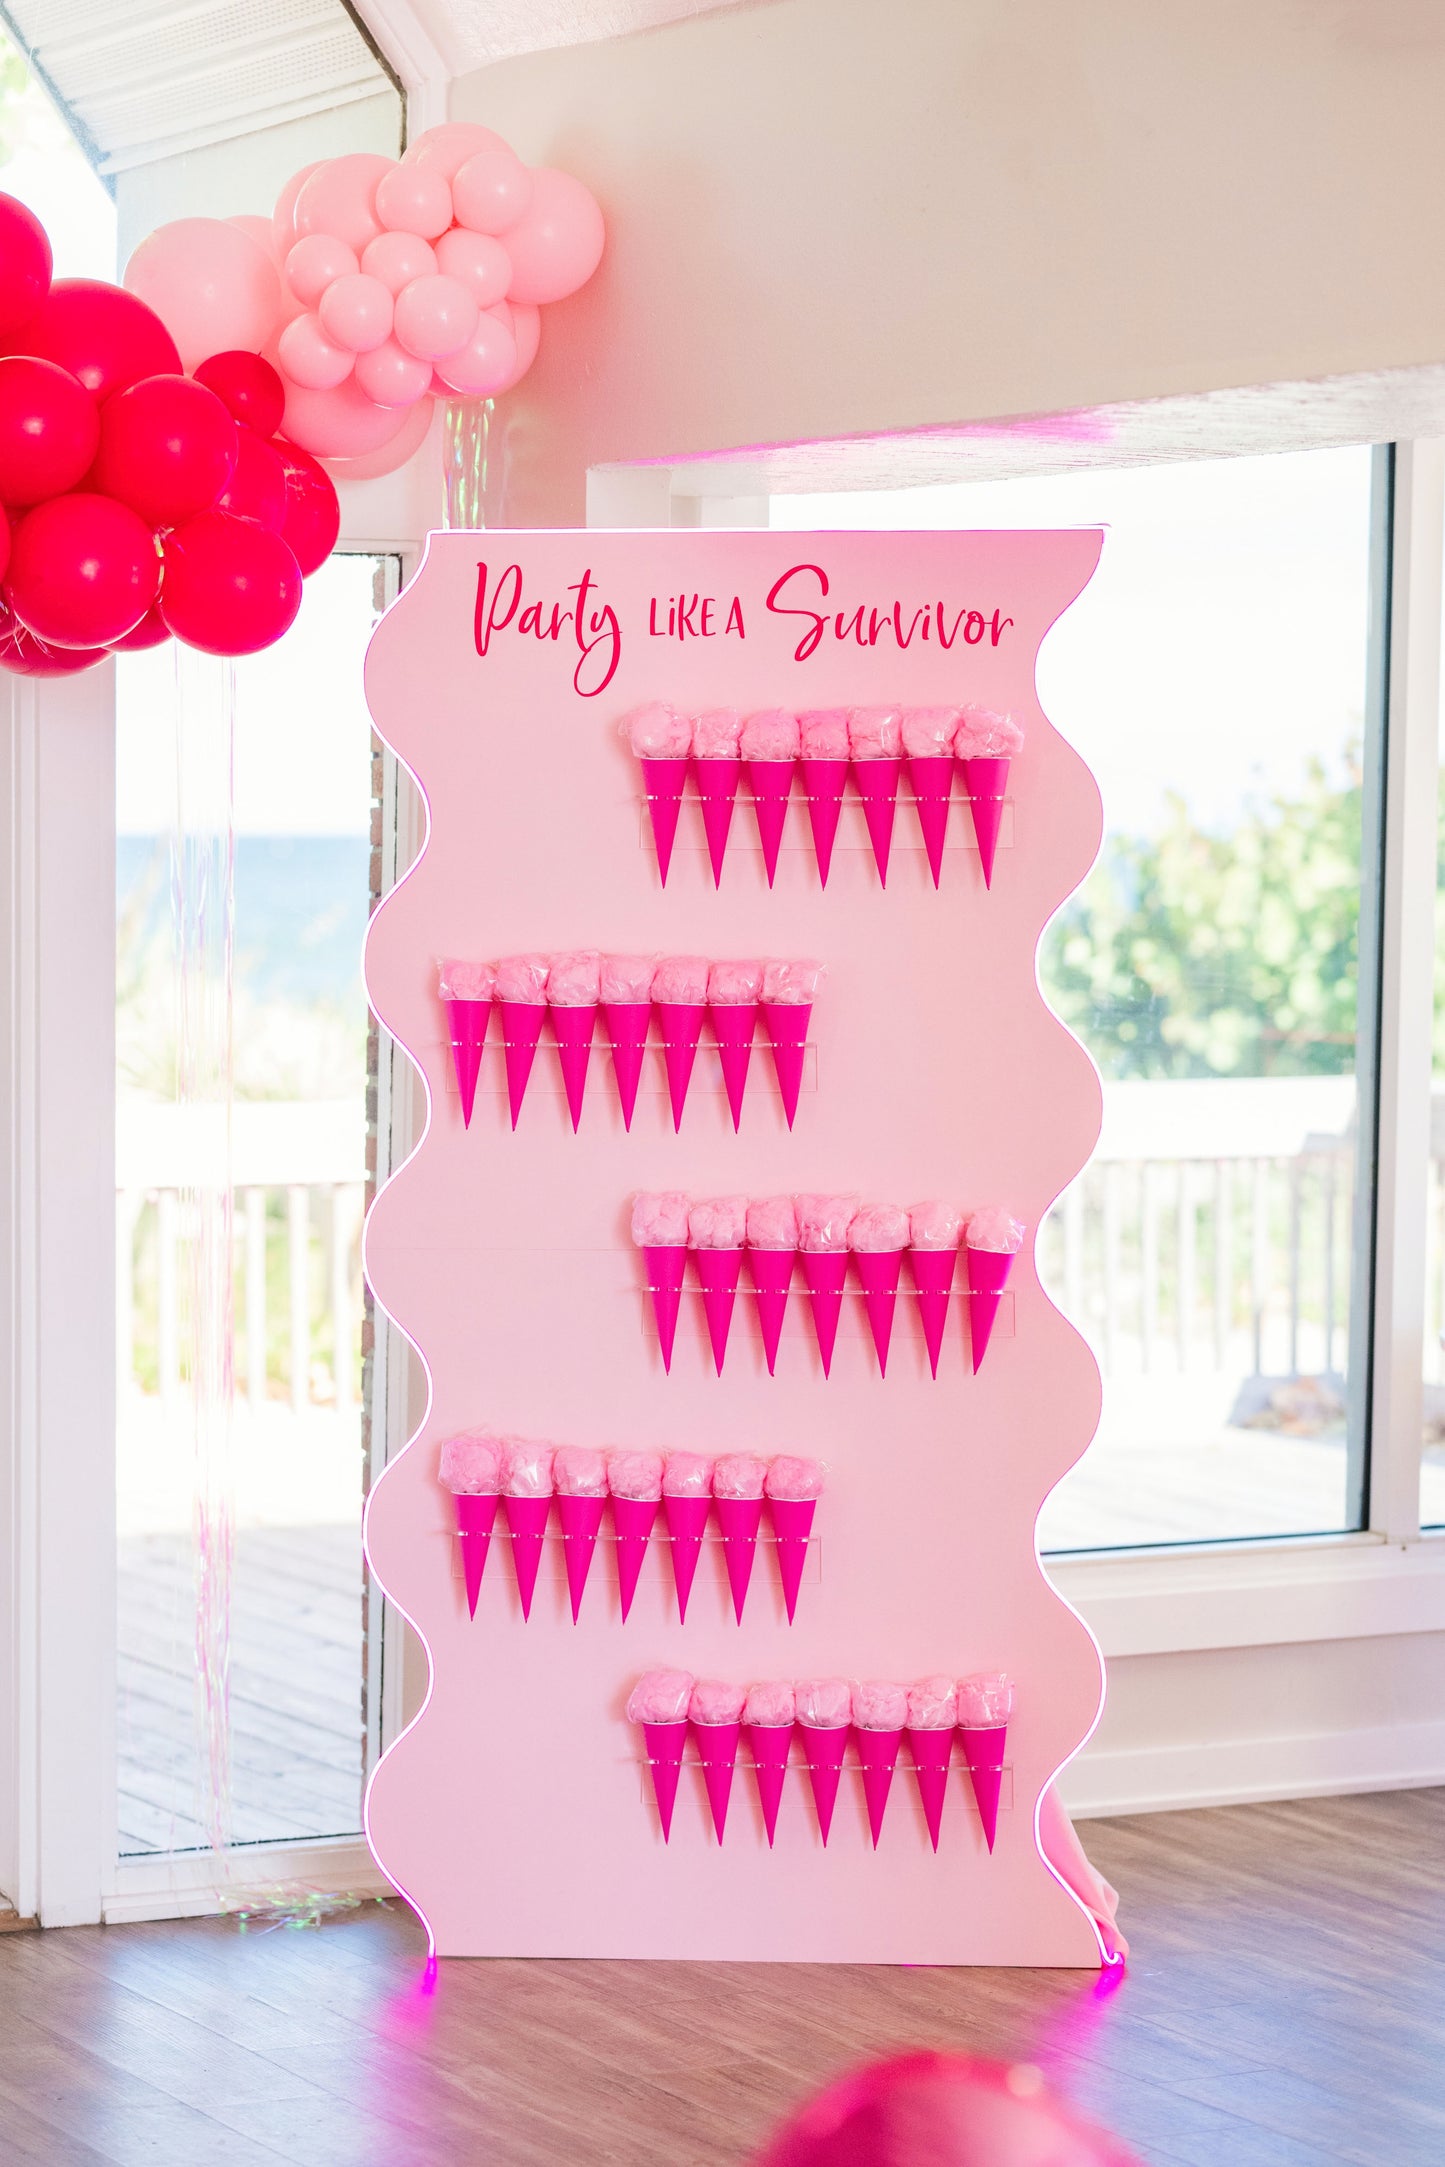 Cotton Candy Wall Rental